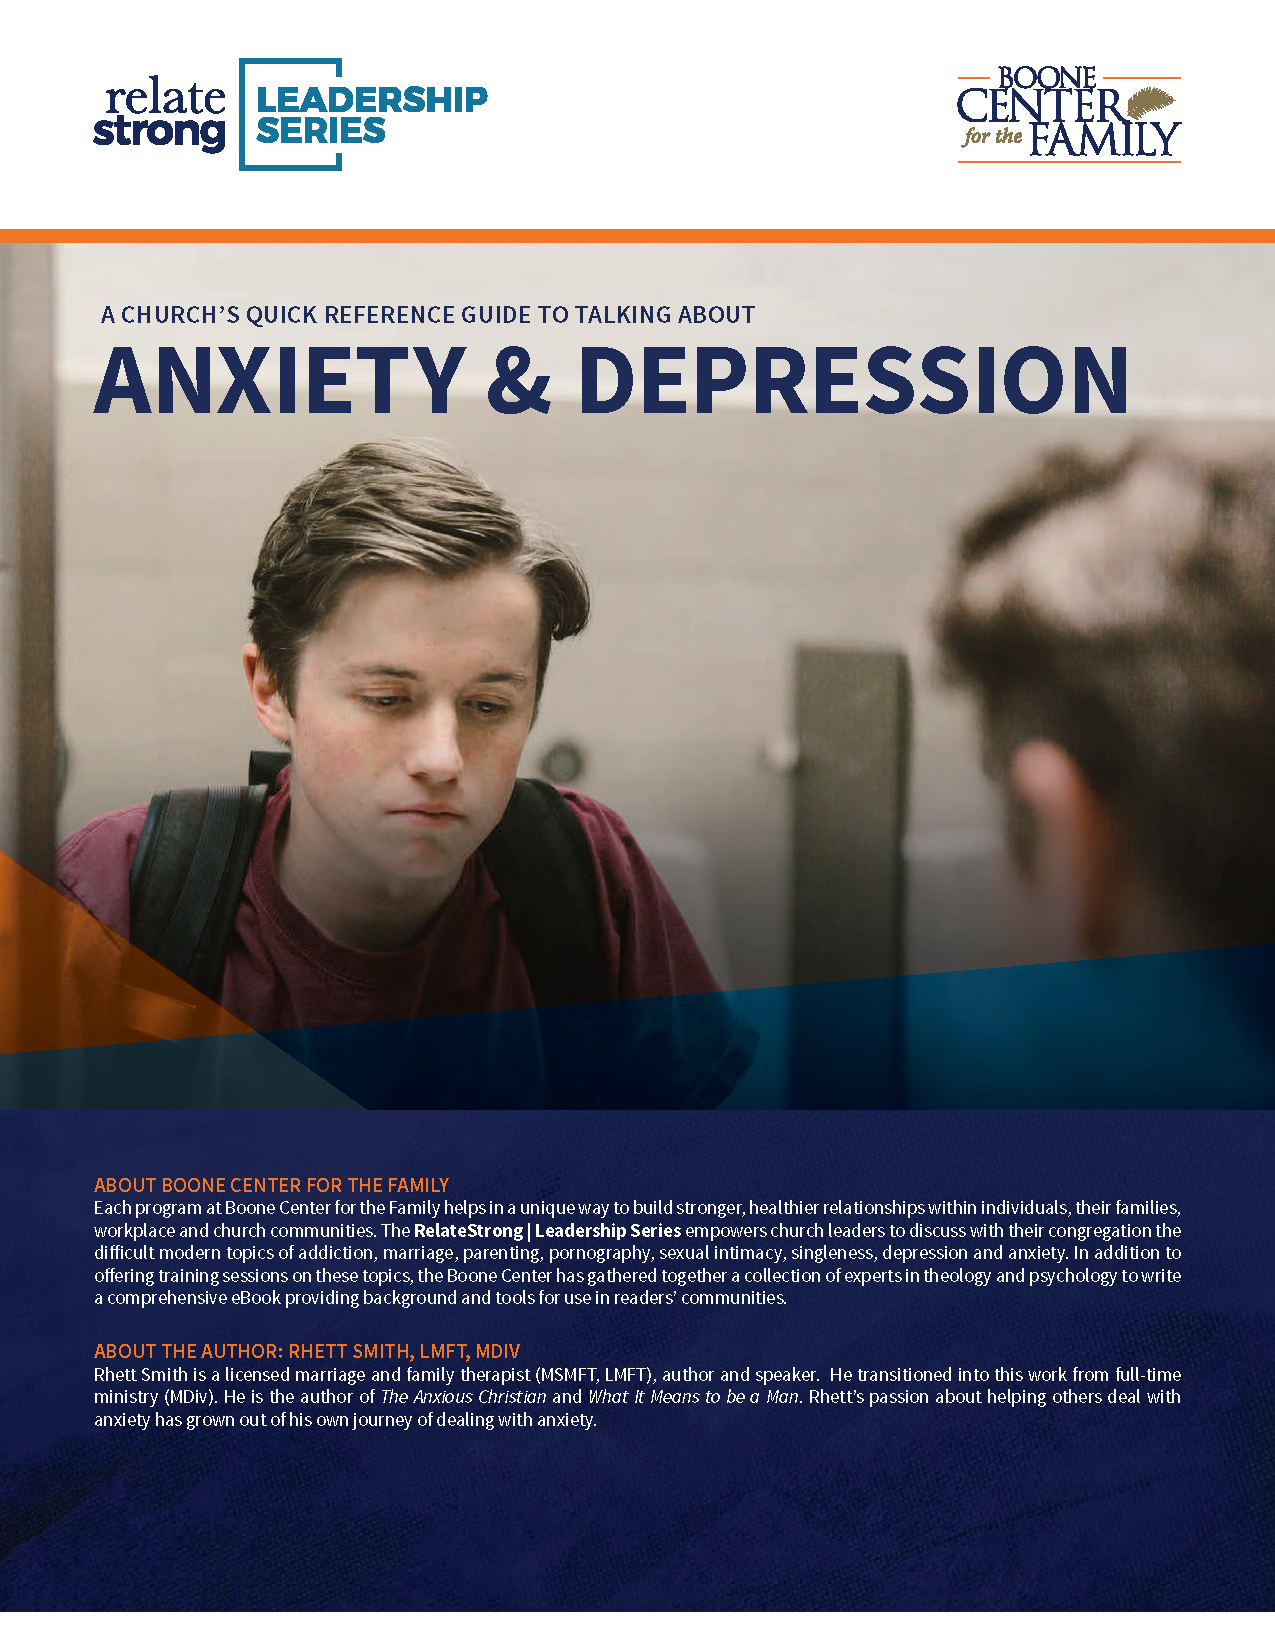 QUICK REFERENCE GUIDE - Talking about Anxiety & Depression